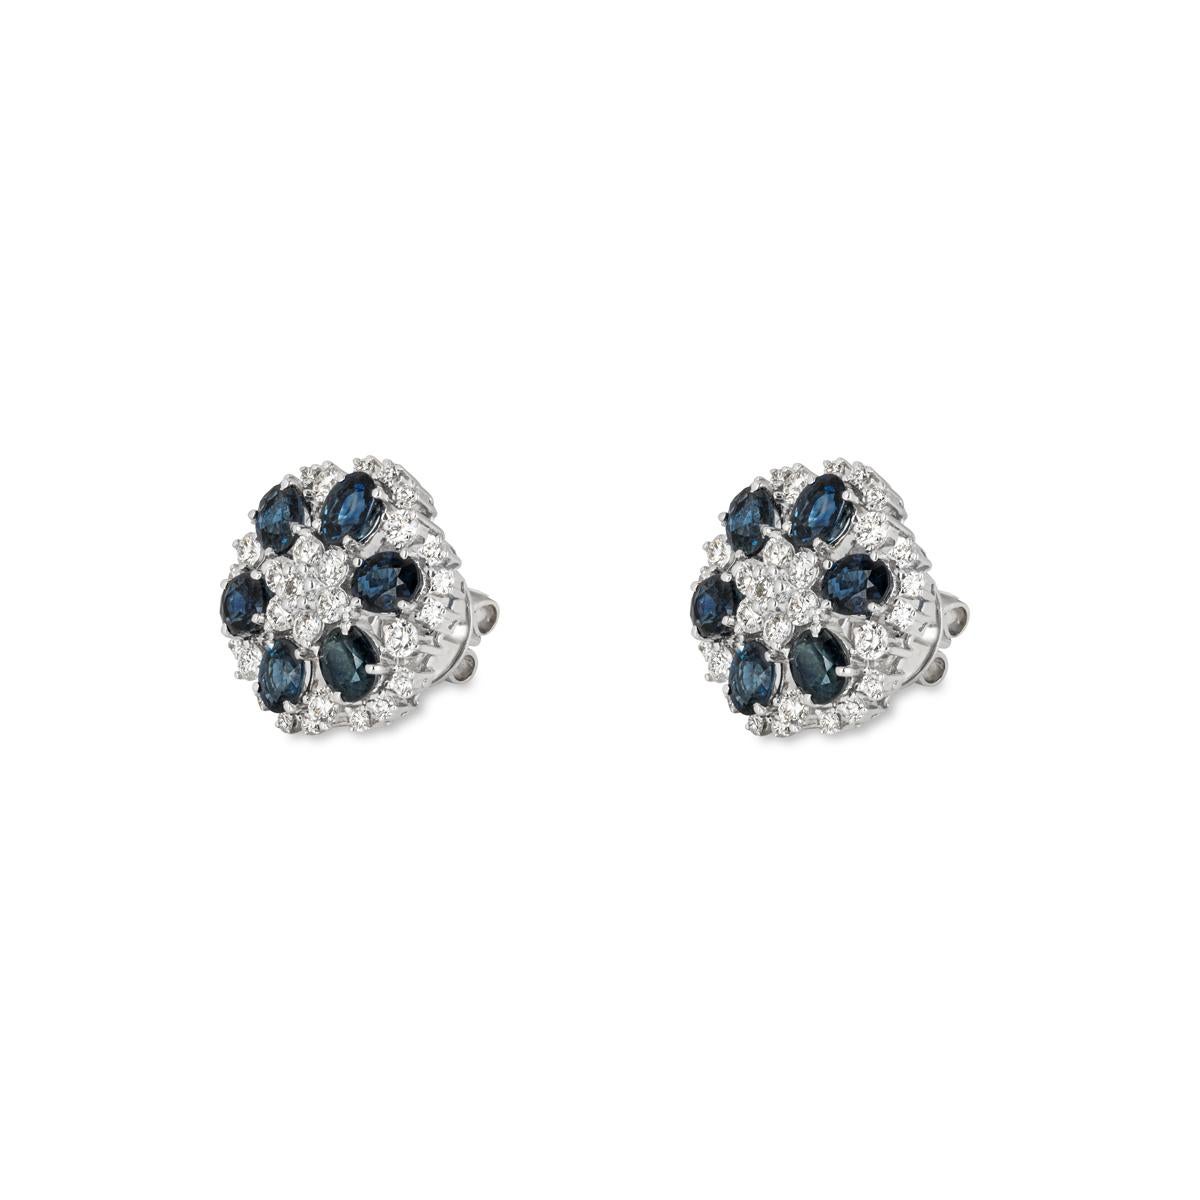 A striking pair of sapphire and diamond stud earrings. The floral earrings comprise of 62 diamonds and 12 sapphires alternating from the centre out. The round brilliant cut diamonds have a total weight of 1.79ct, G-H colour and VS clarity. The oval